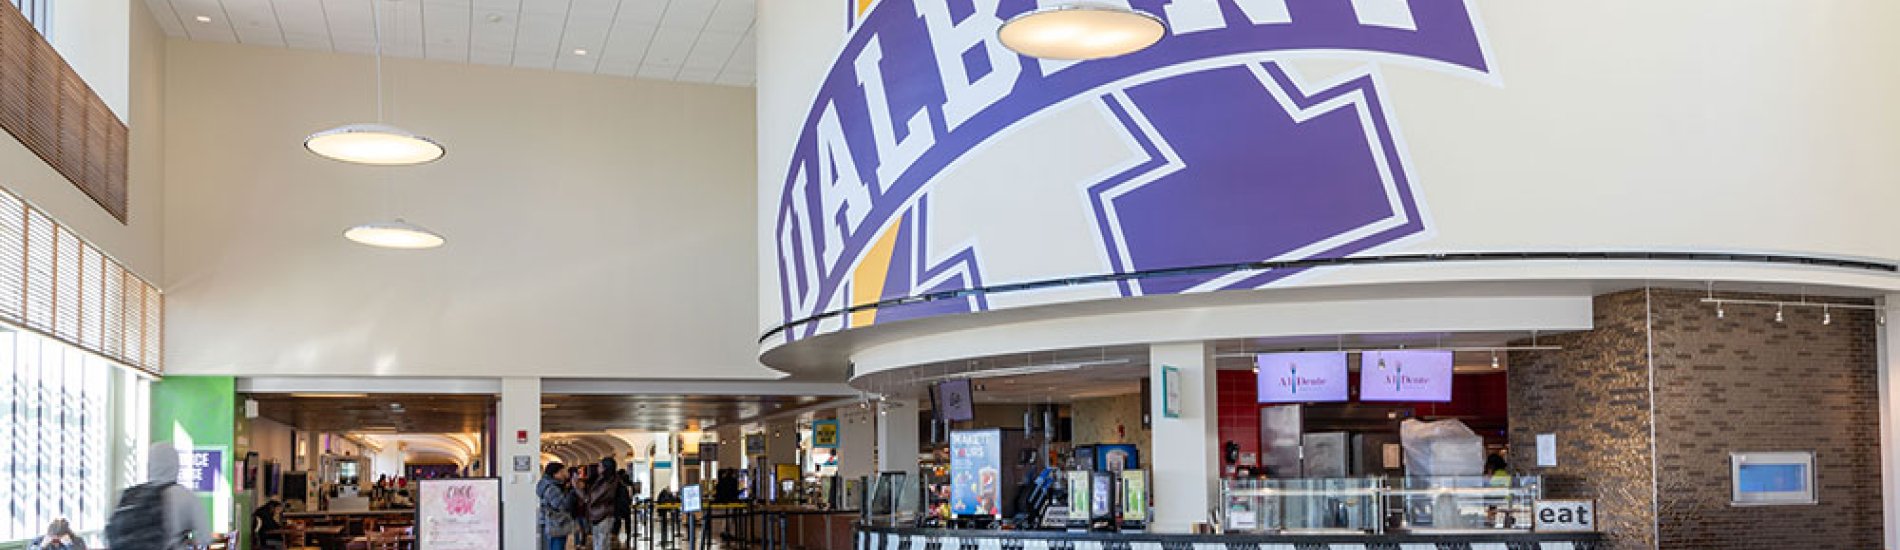 UAlbany campus center dining